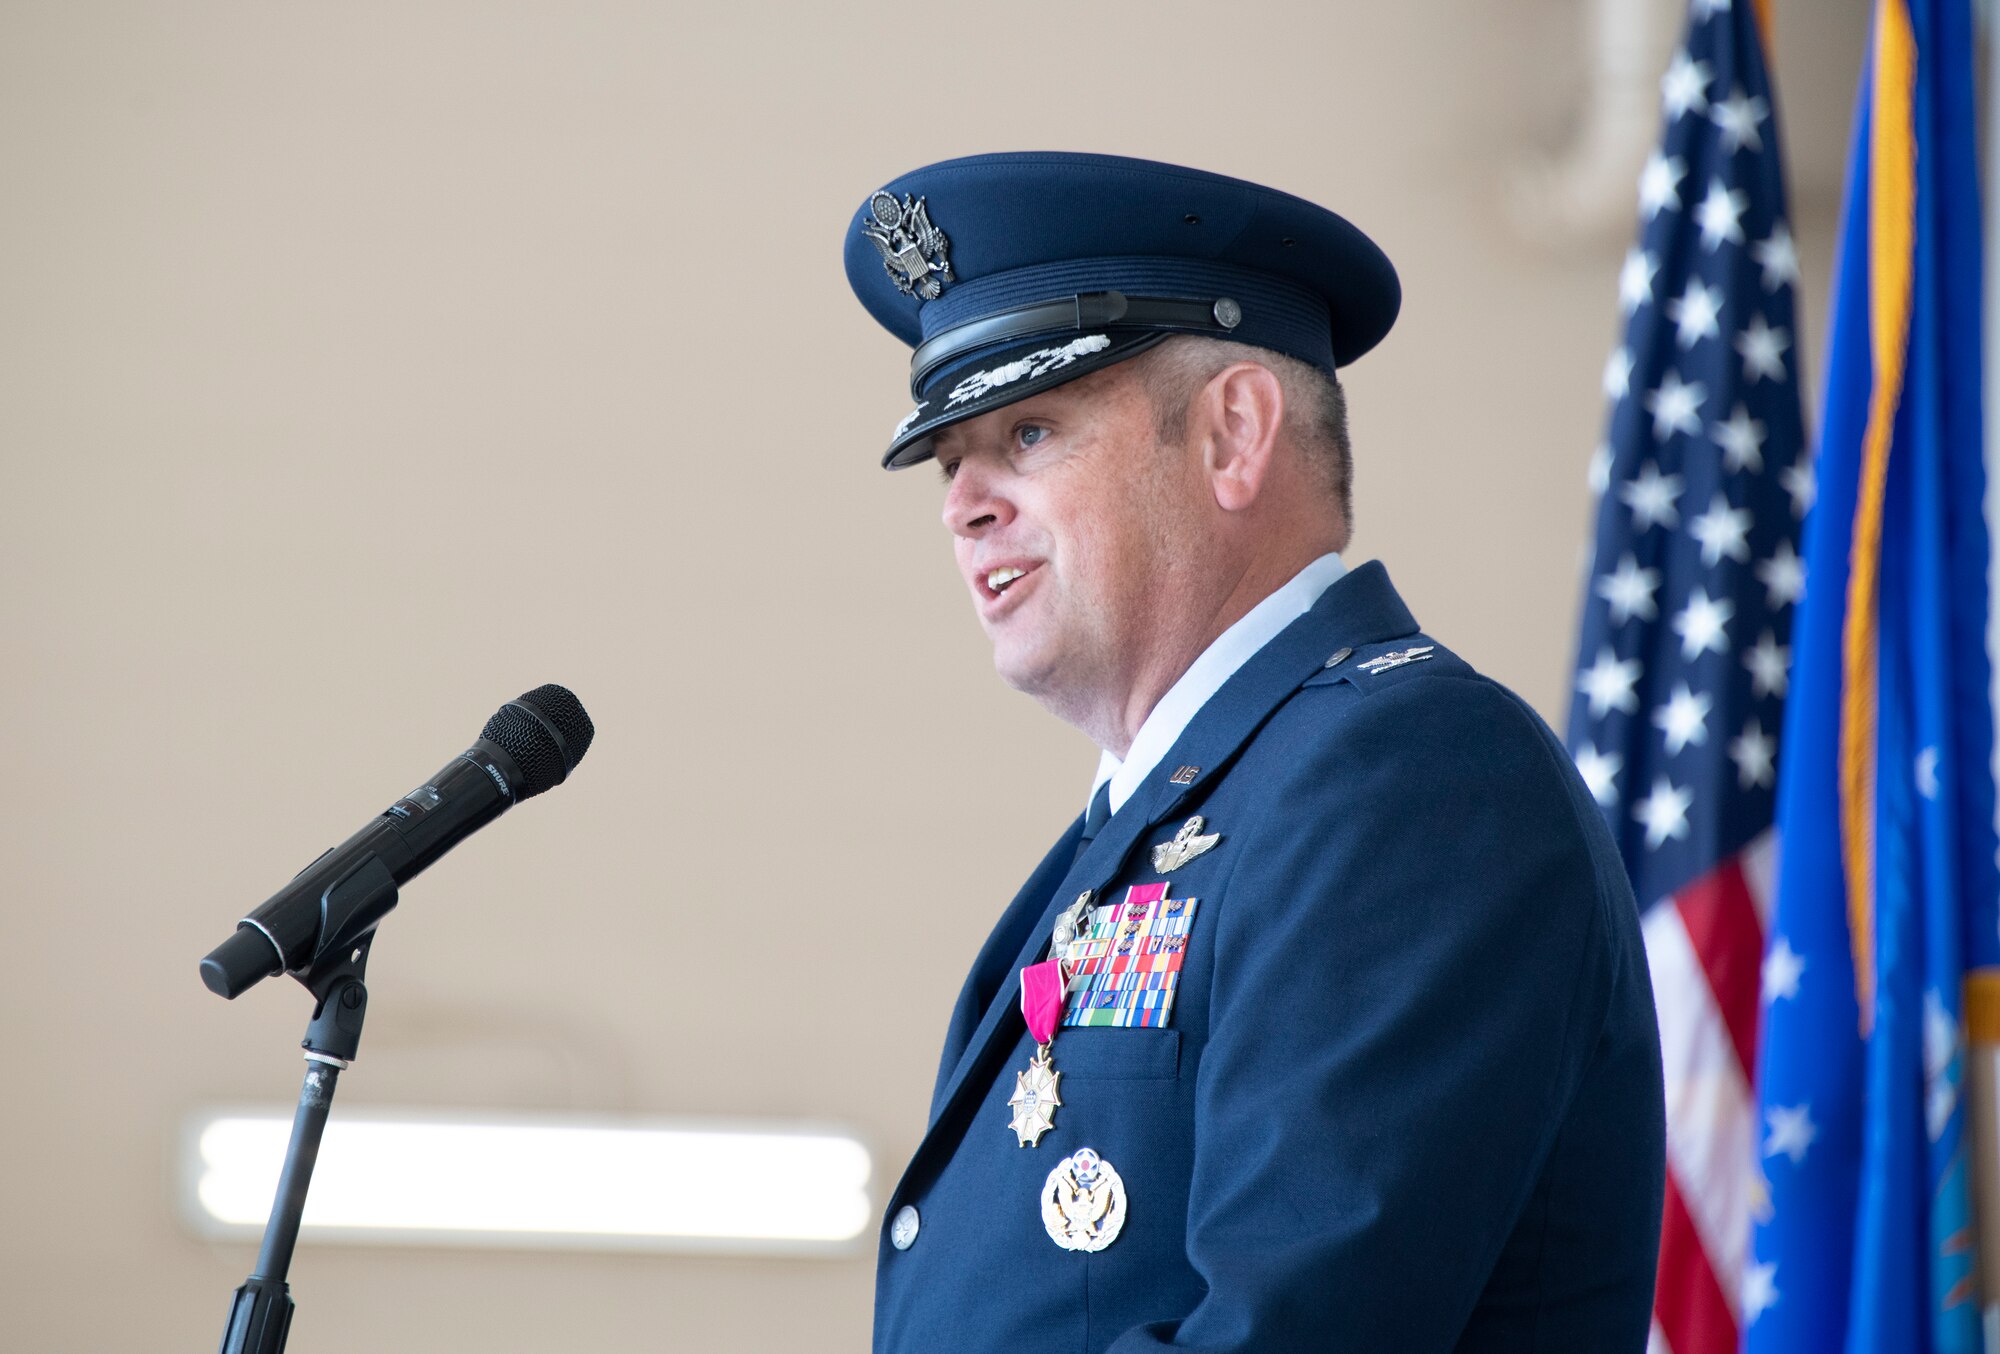 U.S. Air Force Col. Corey Simmons, outgoing 60th Air Mobility Wing commander, delivers remarks during the 60th AMW change of command ceremony at Travis Air Force Base, California, July 27, 2022. A change of command ceremony is a military tradition of formal transfer of command, responsibilities and authority from one commander to another. (U.S. Air Force photo by Heide Couch)